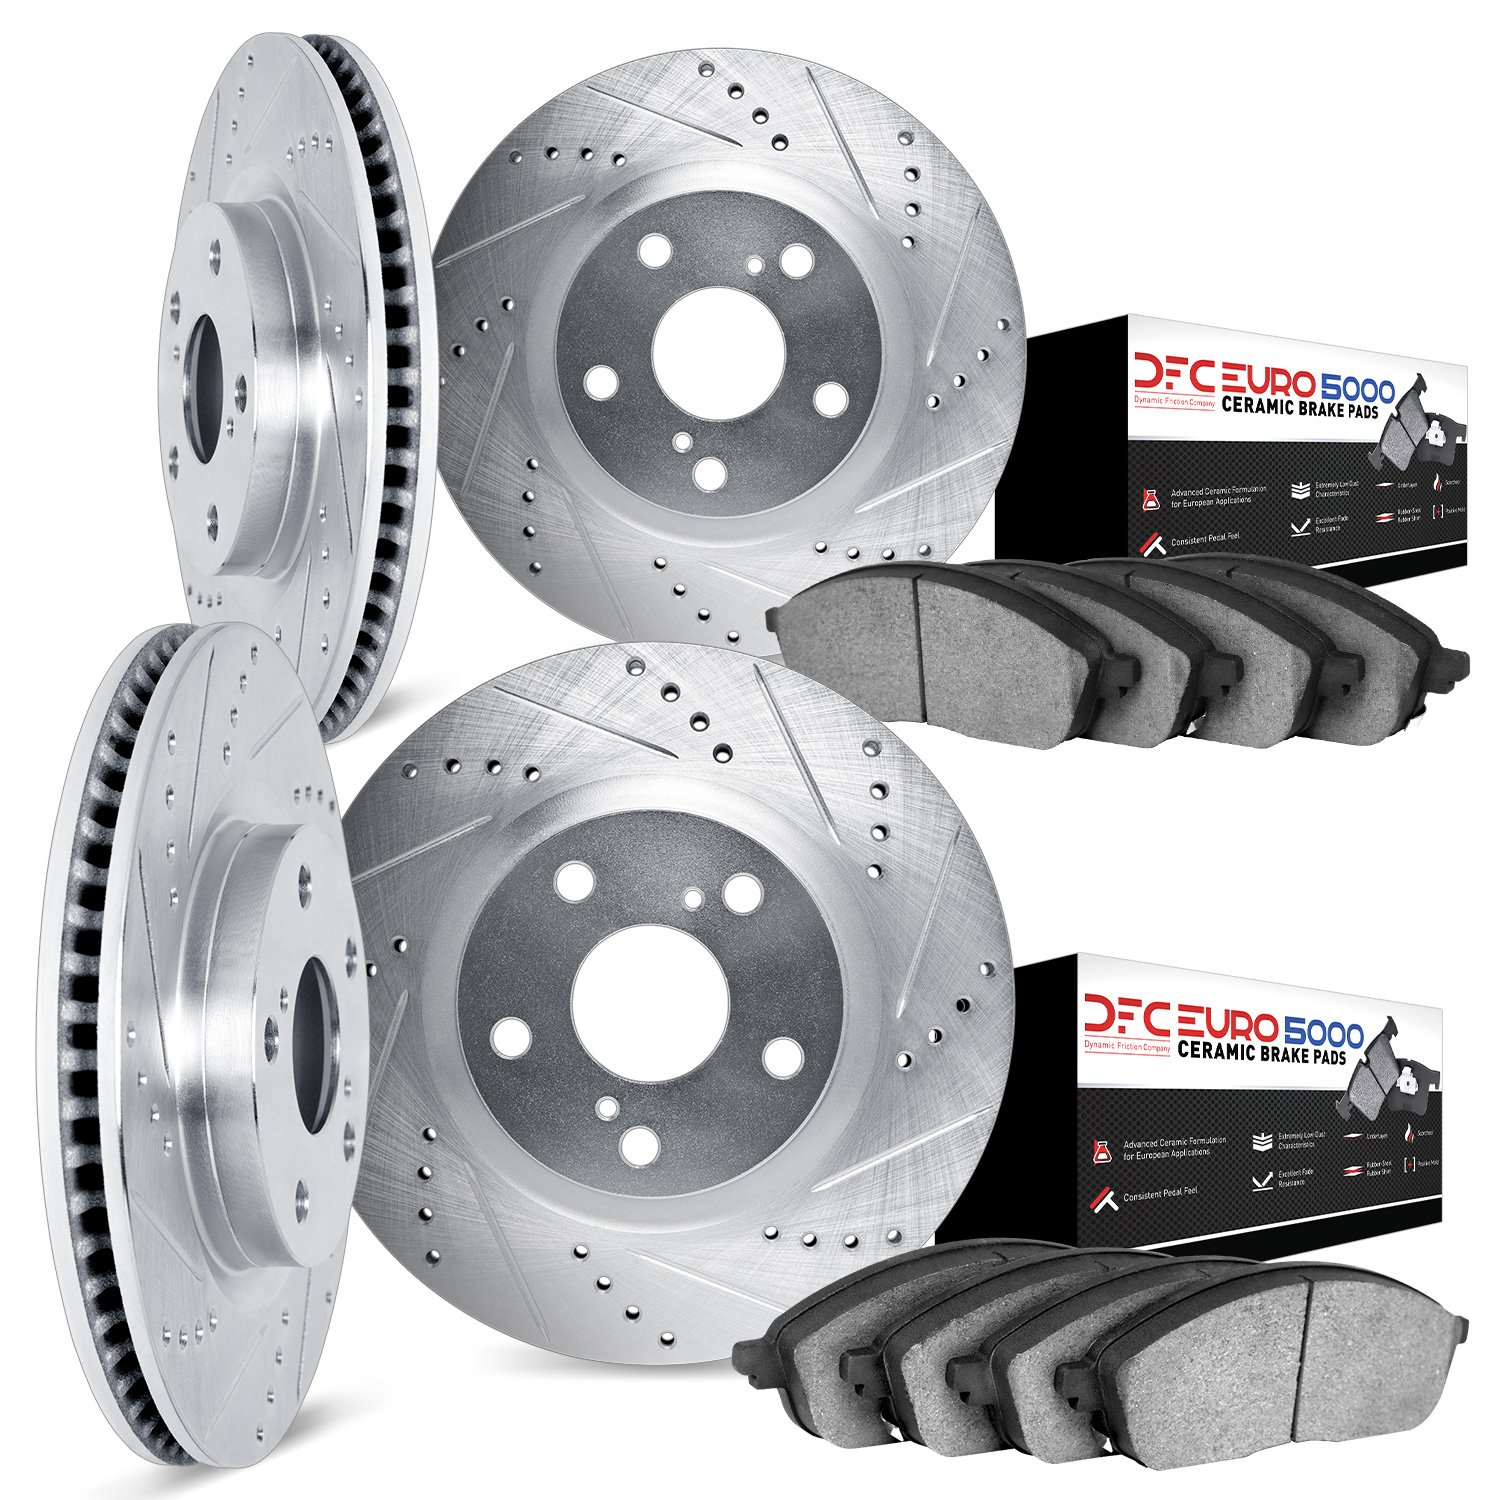 7604-02007 Drilled/Slotted Brake Rotors w/5000 Euro Ceramic Brake Pads Kit [Silver], 1997-2004 Porsche, Position: Front and Rear